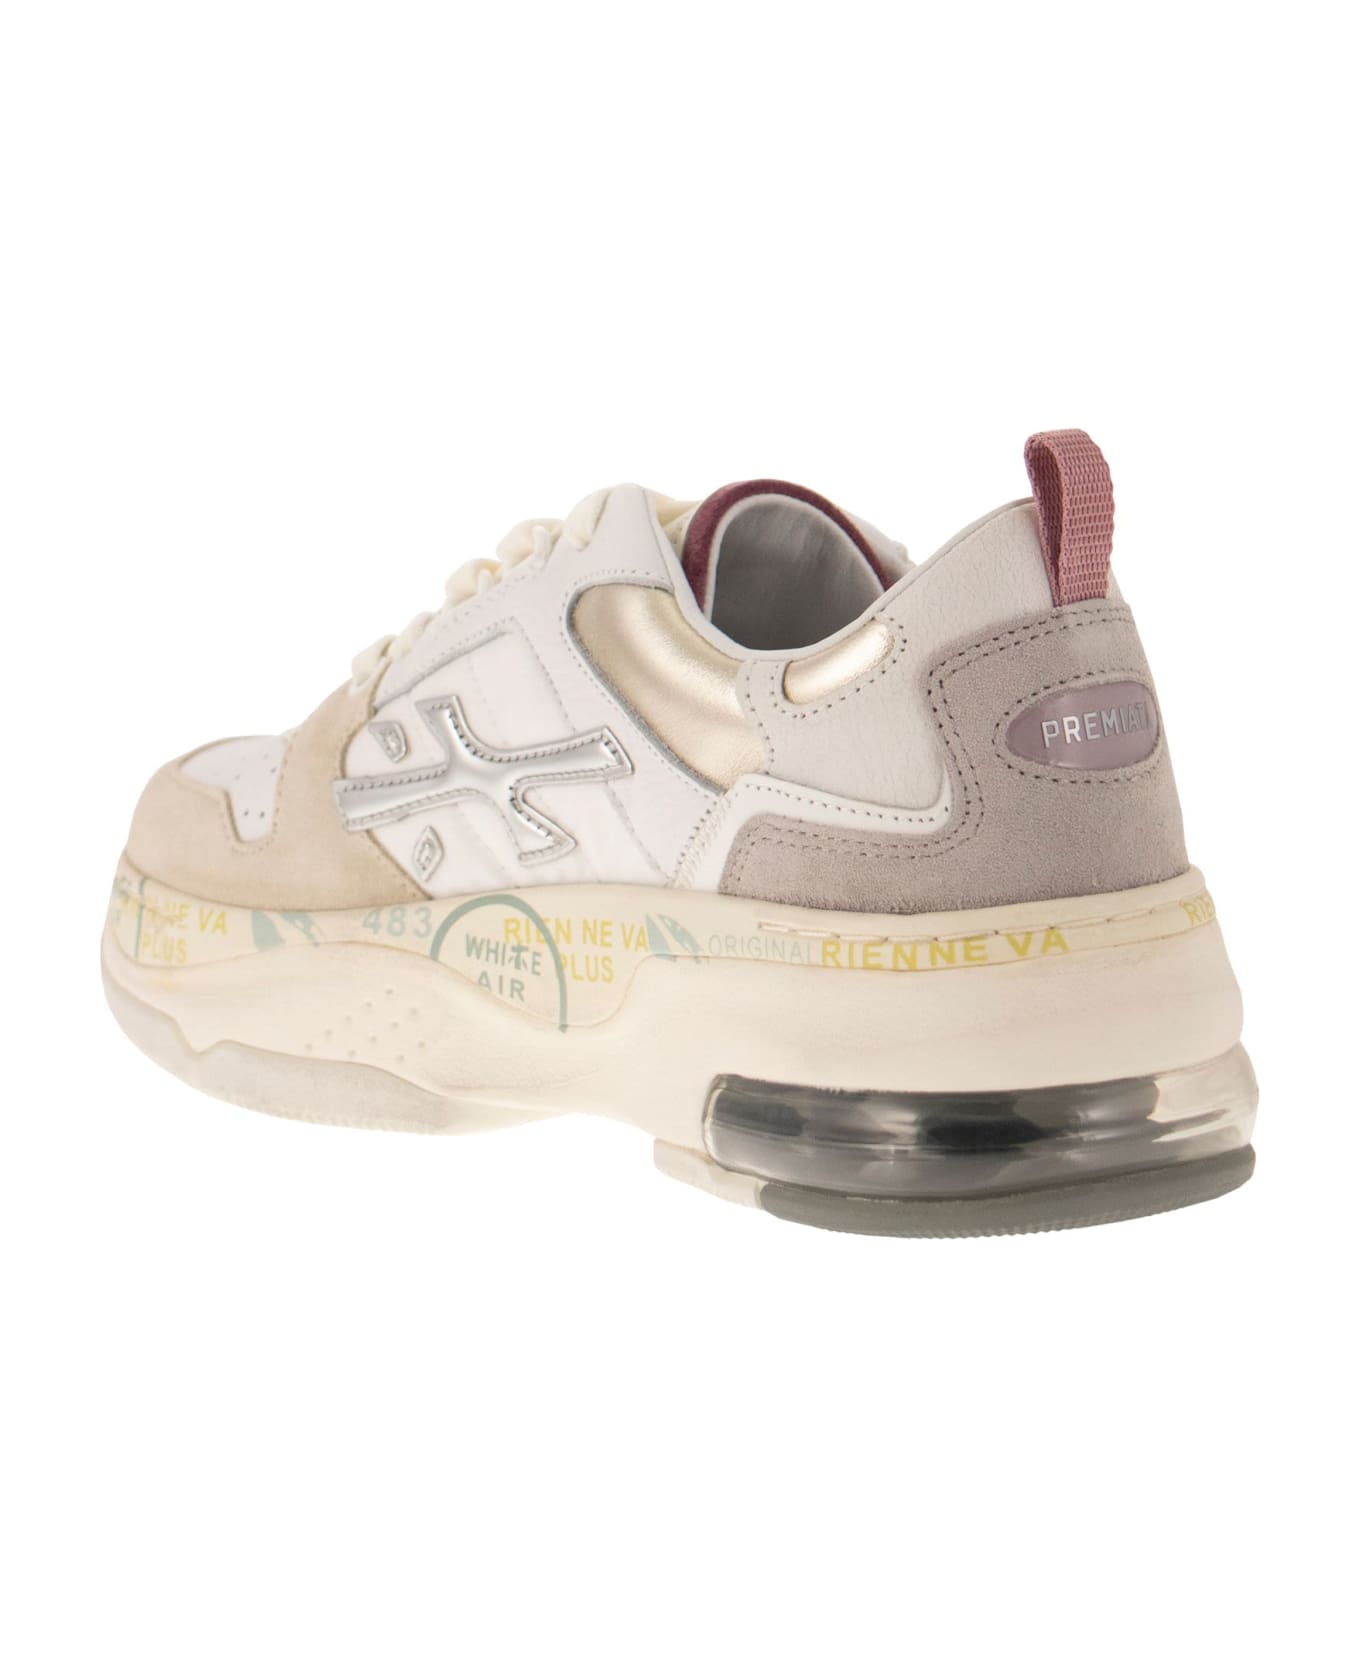 Premiata 'draked' Multicolor Leather Blend Sneakers - White/ivory